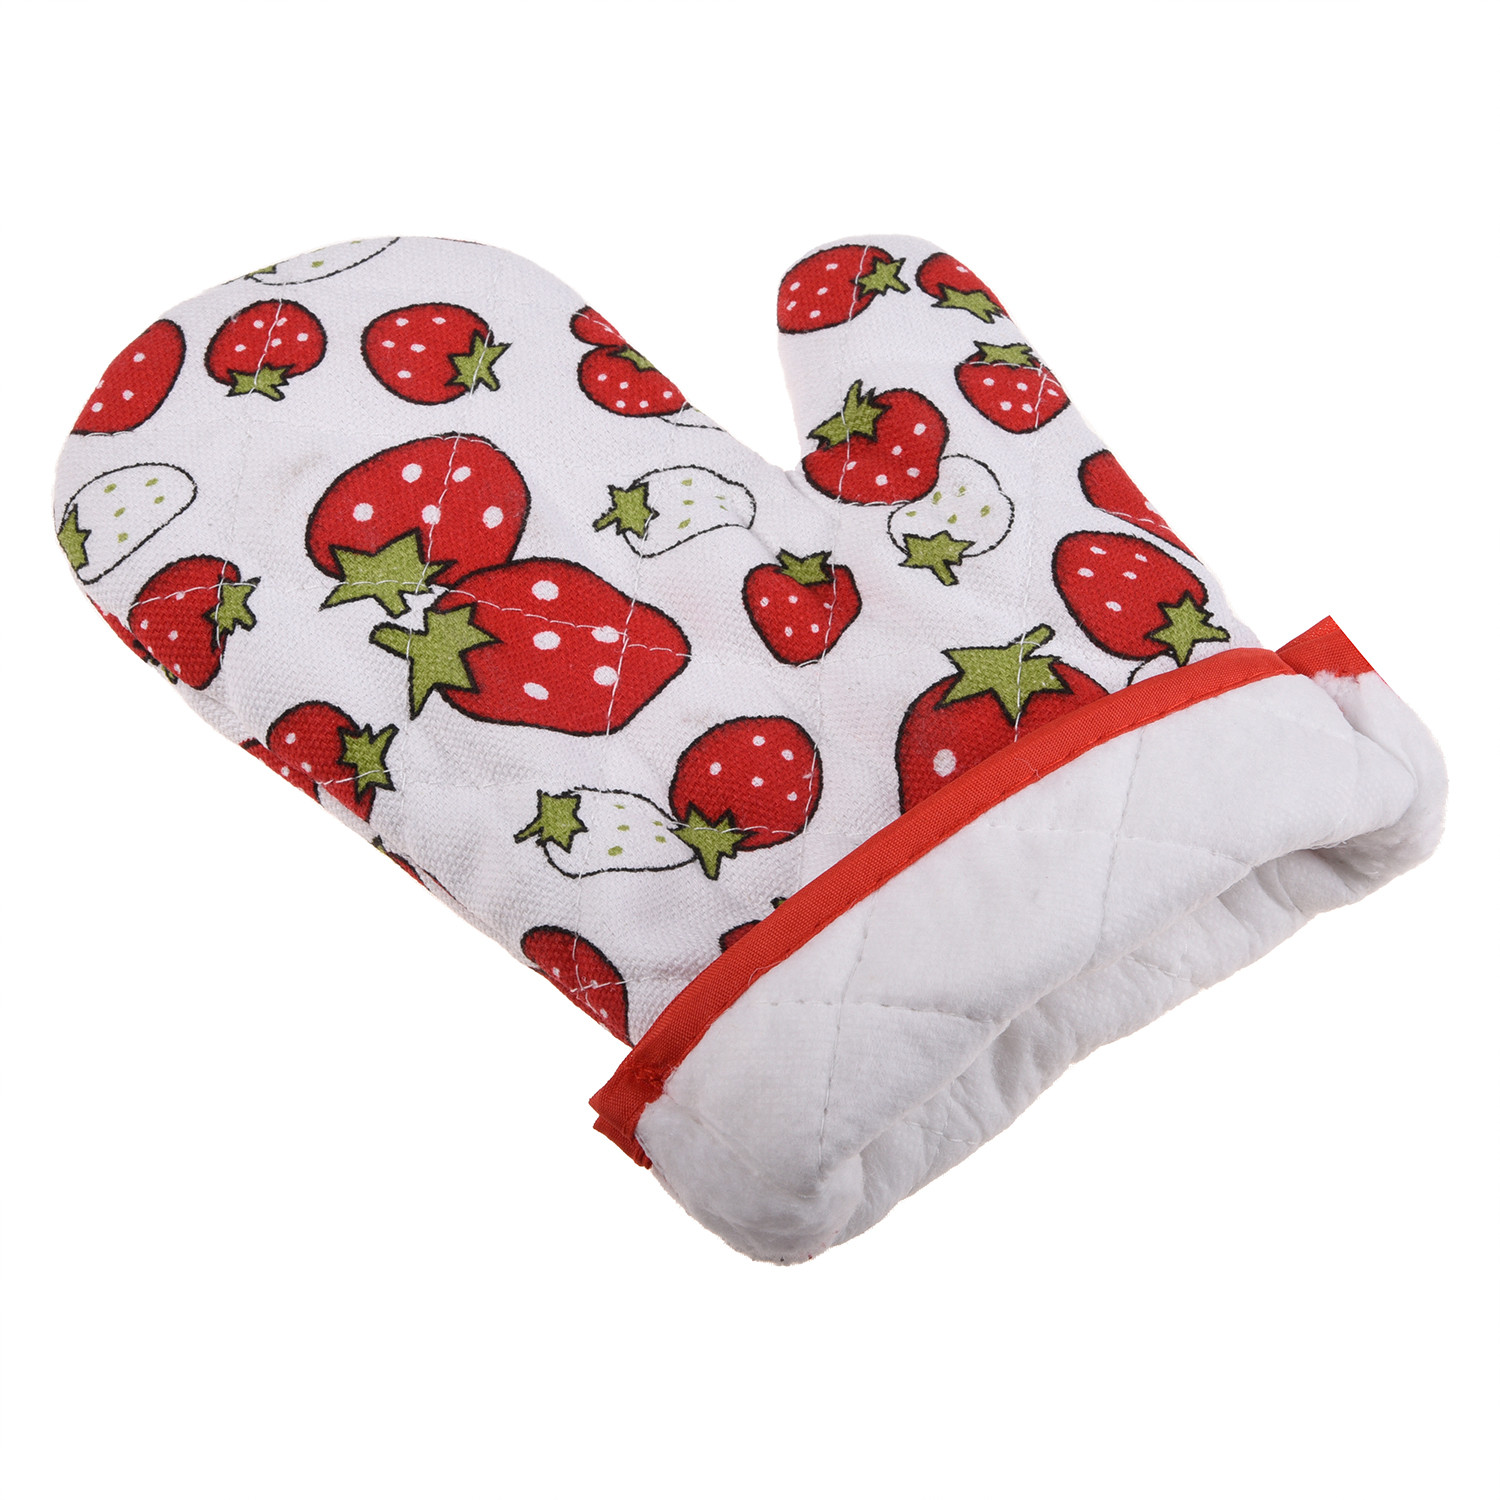 Kuber Industries Oven Mitts|Cotton Microwave Oven Insulated Gloves|Strawberry Print Hanging Loop Kitchen Oven|Heat Resistant|Microwave Gloves For Kitchen|1 Pair (White)